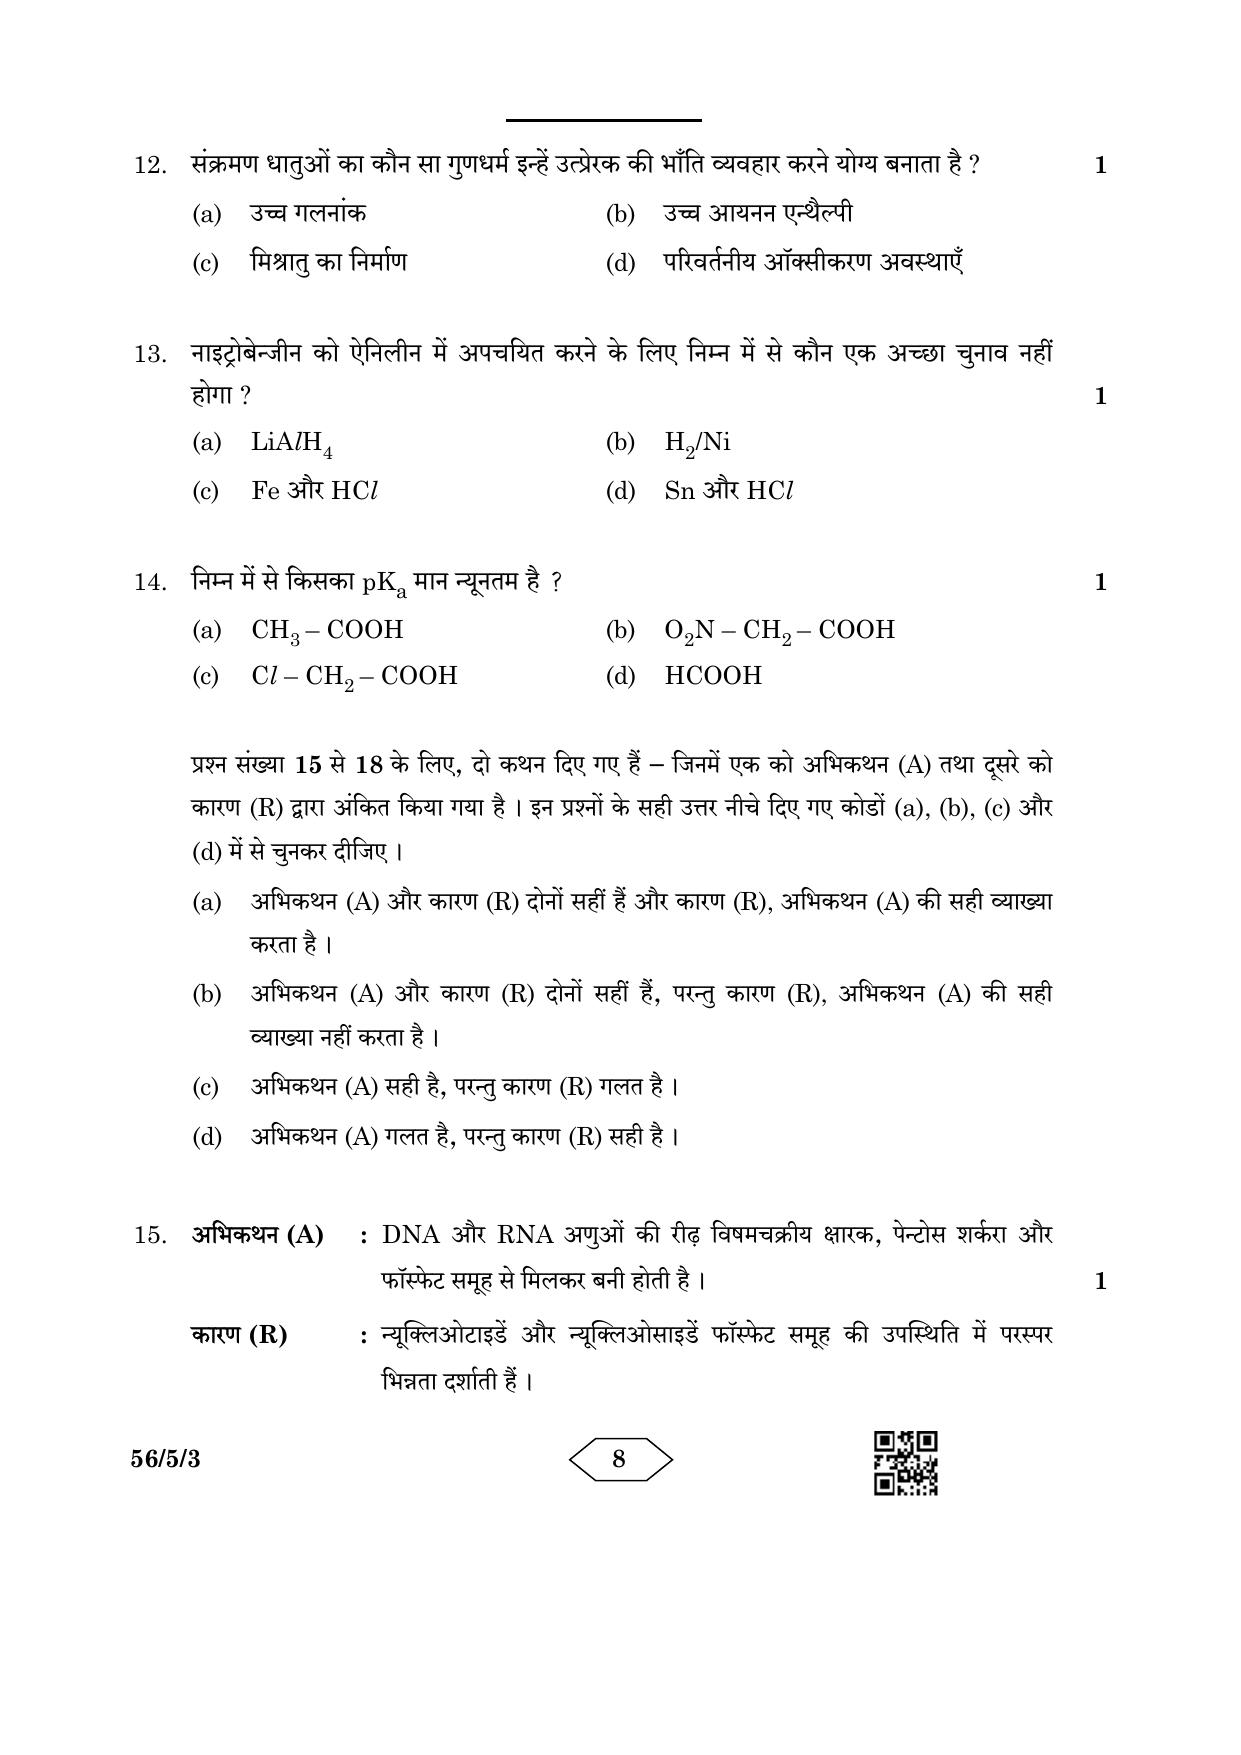 CBSE Class 12 56-5-3 Chemistry 2023 Question Paper - Page 8